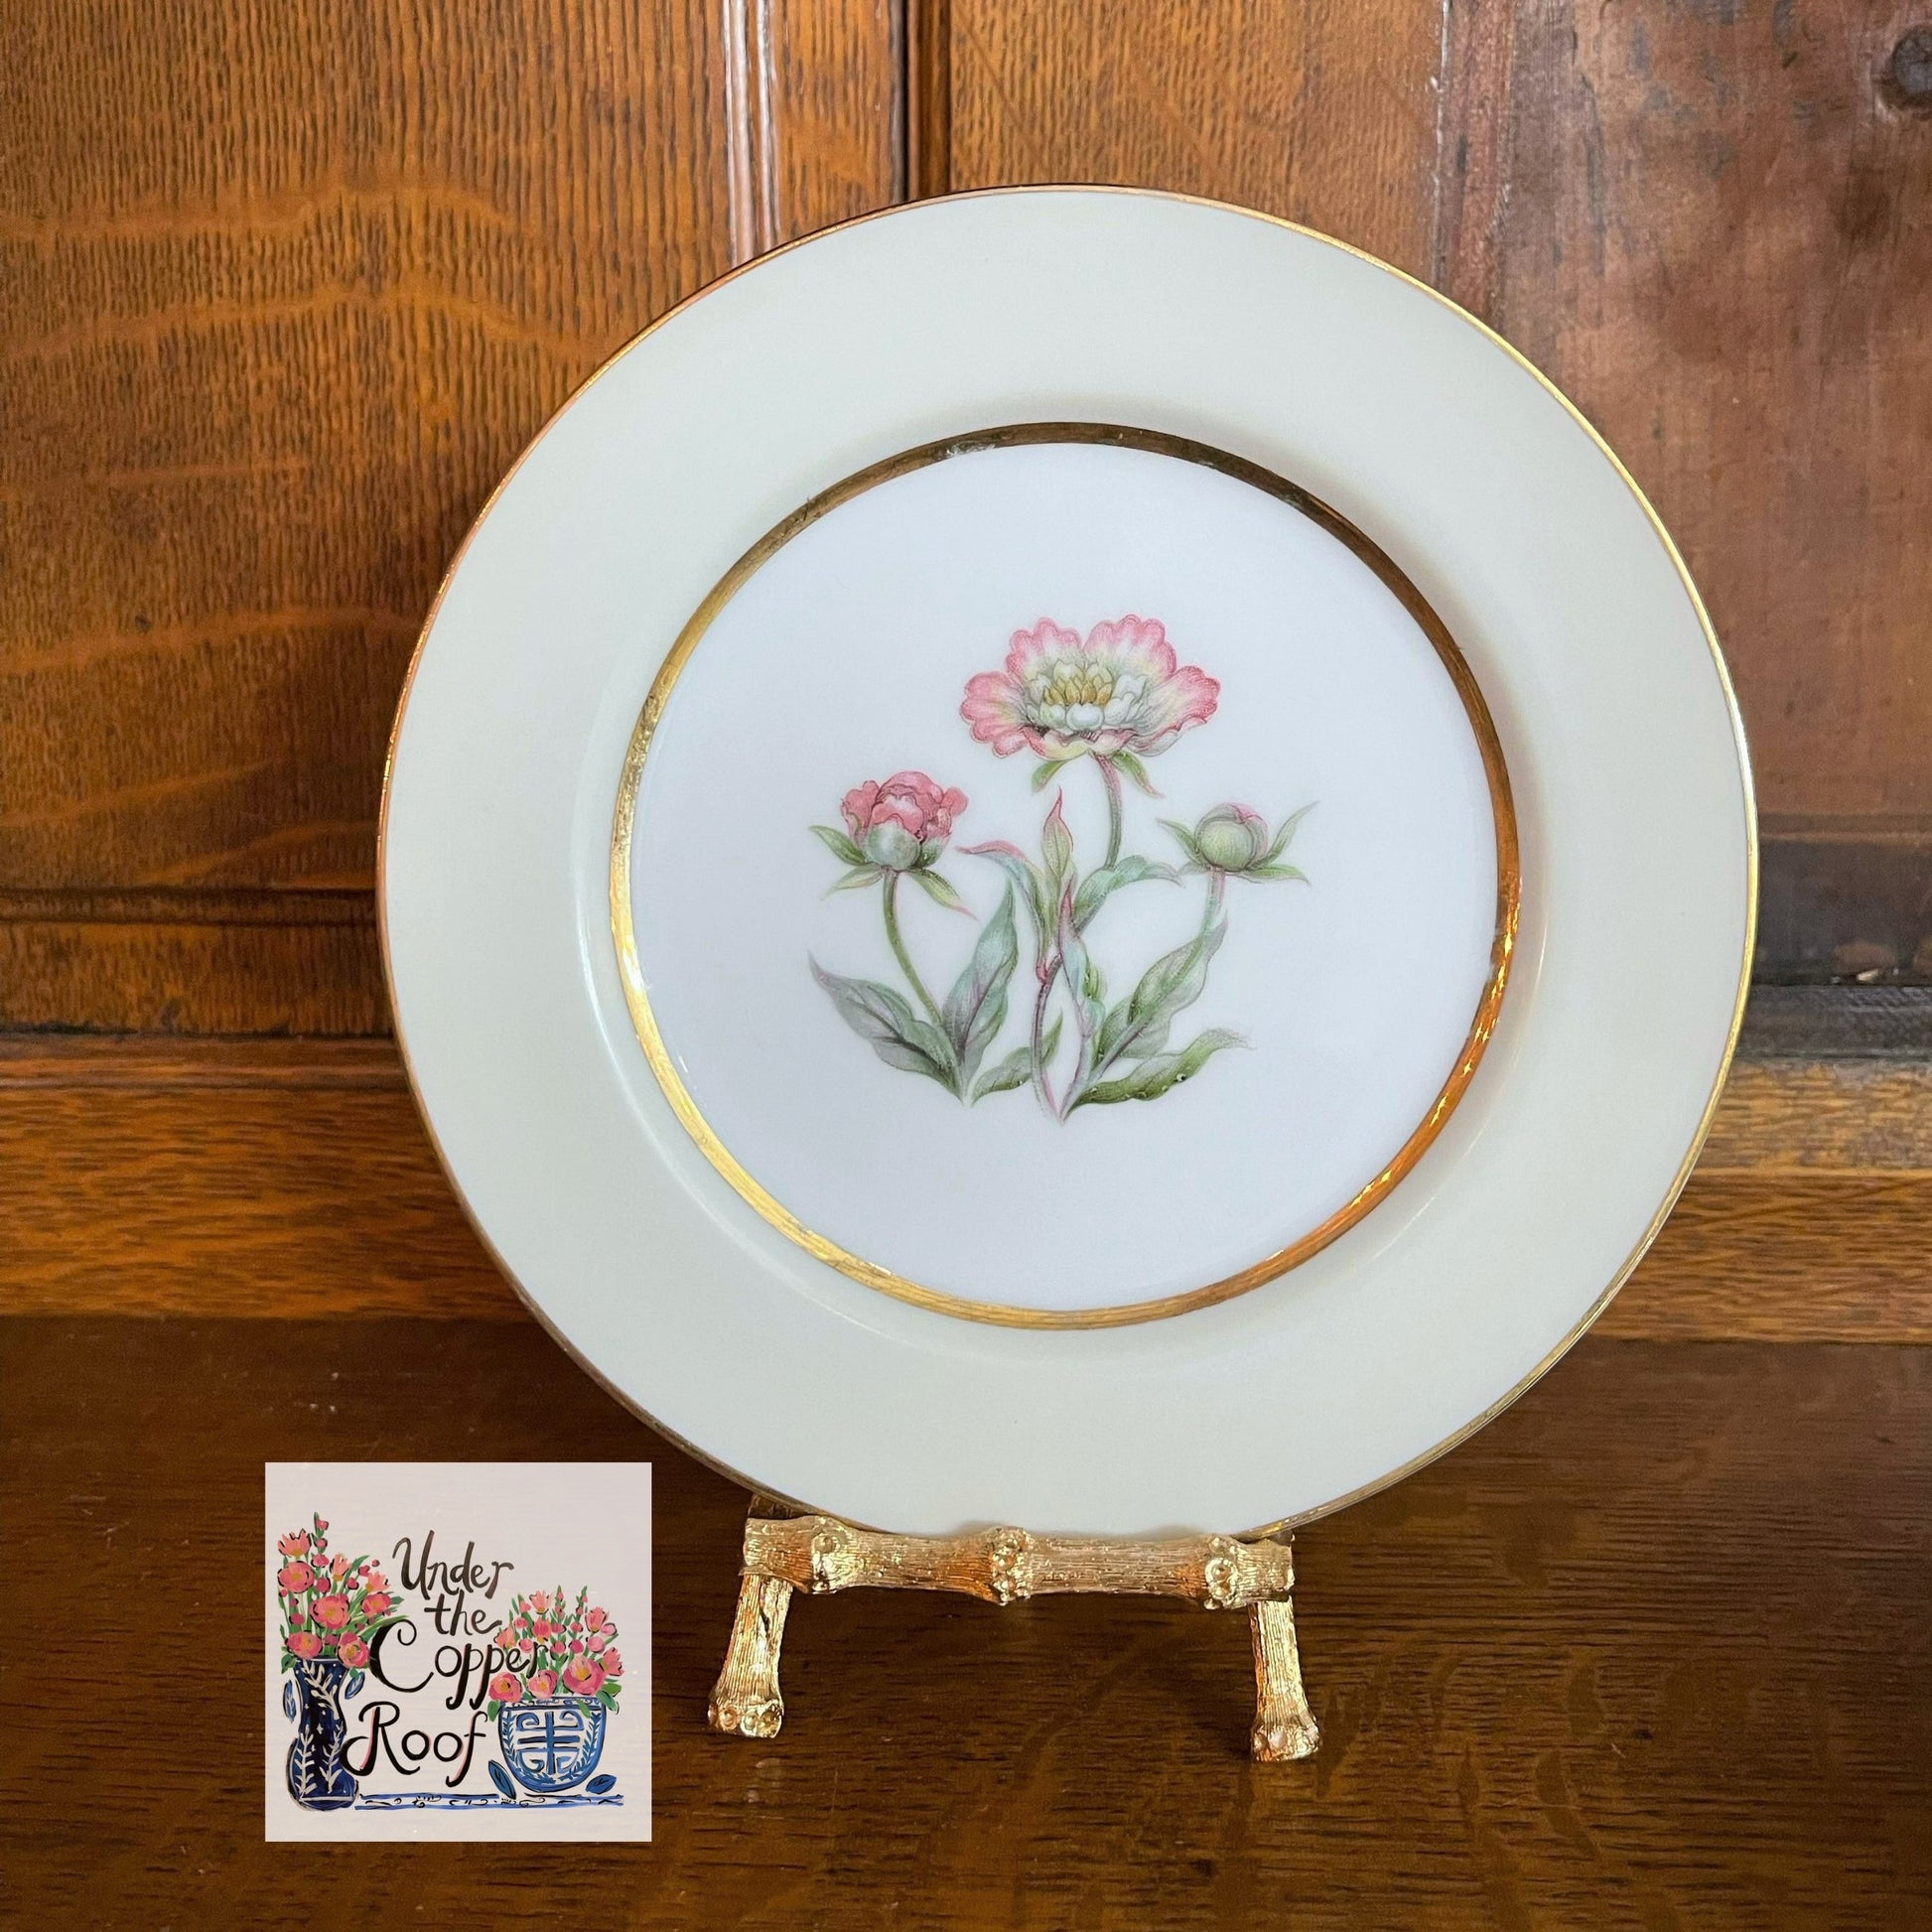 home decor, cottagecore, cottage style, cottage chic, pretty tableware, vintage, antique, wall art, wall decor, vintage decor, vintage dishes, planter, pink flower, pink and green, spring table decor, easter decor, easter brunch, spring flowers